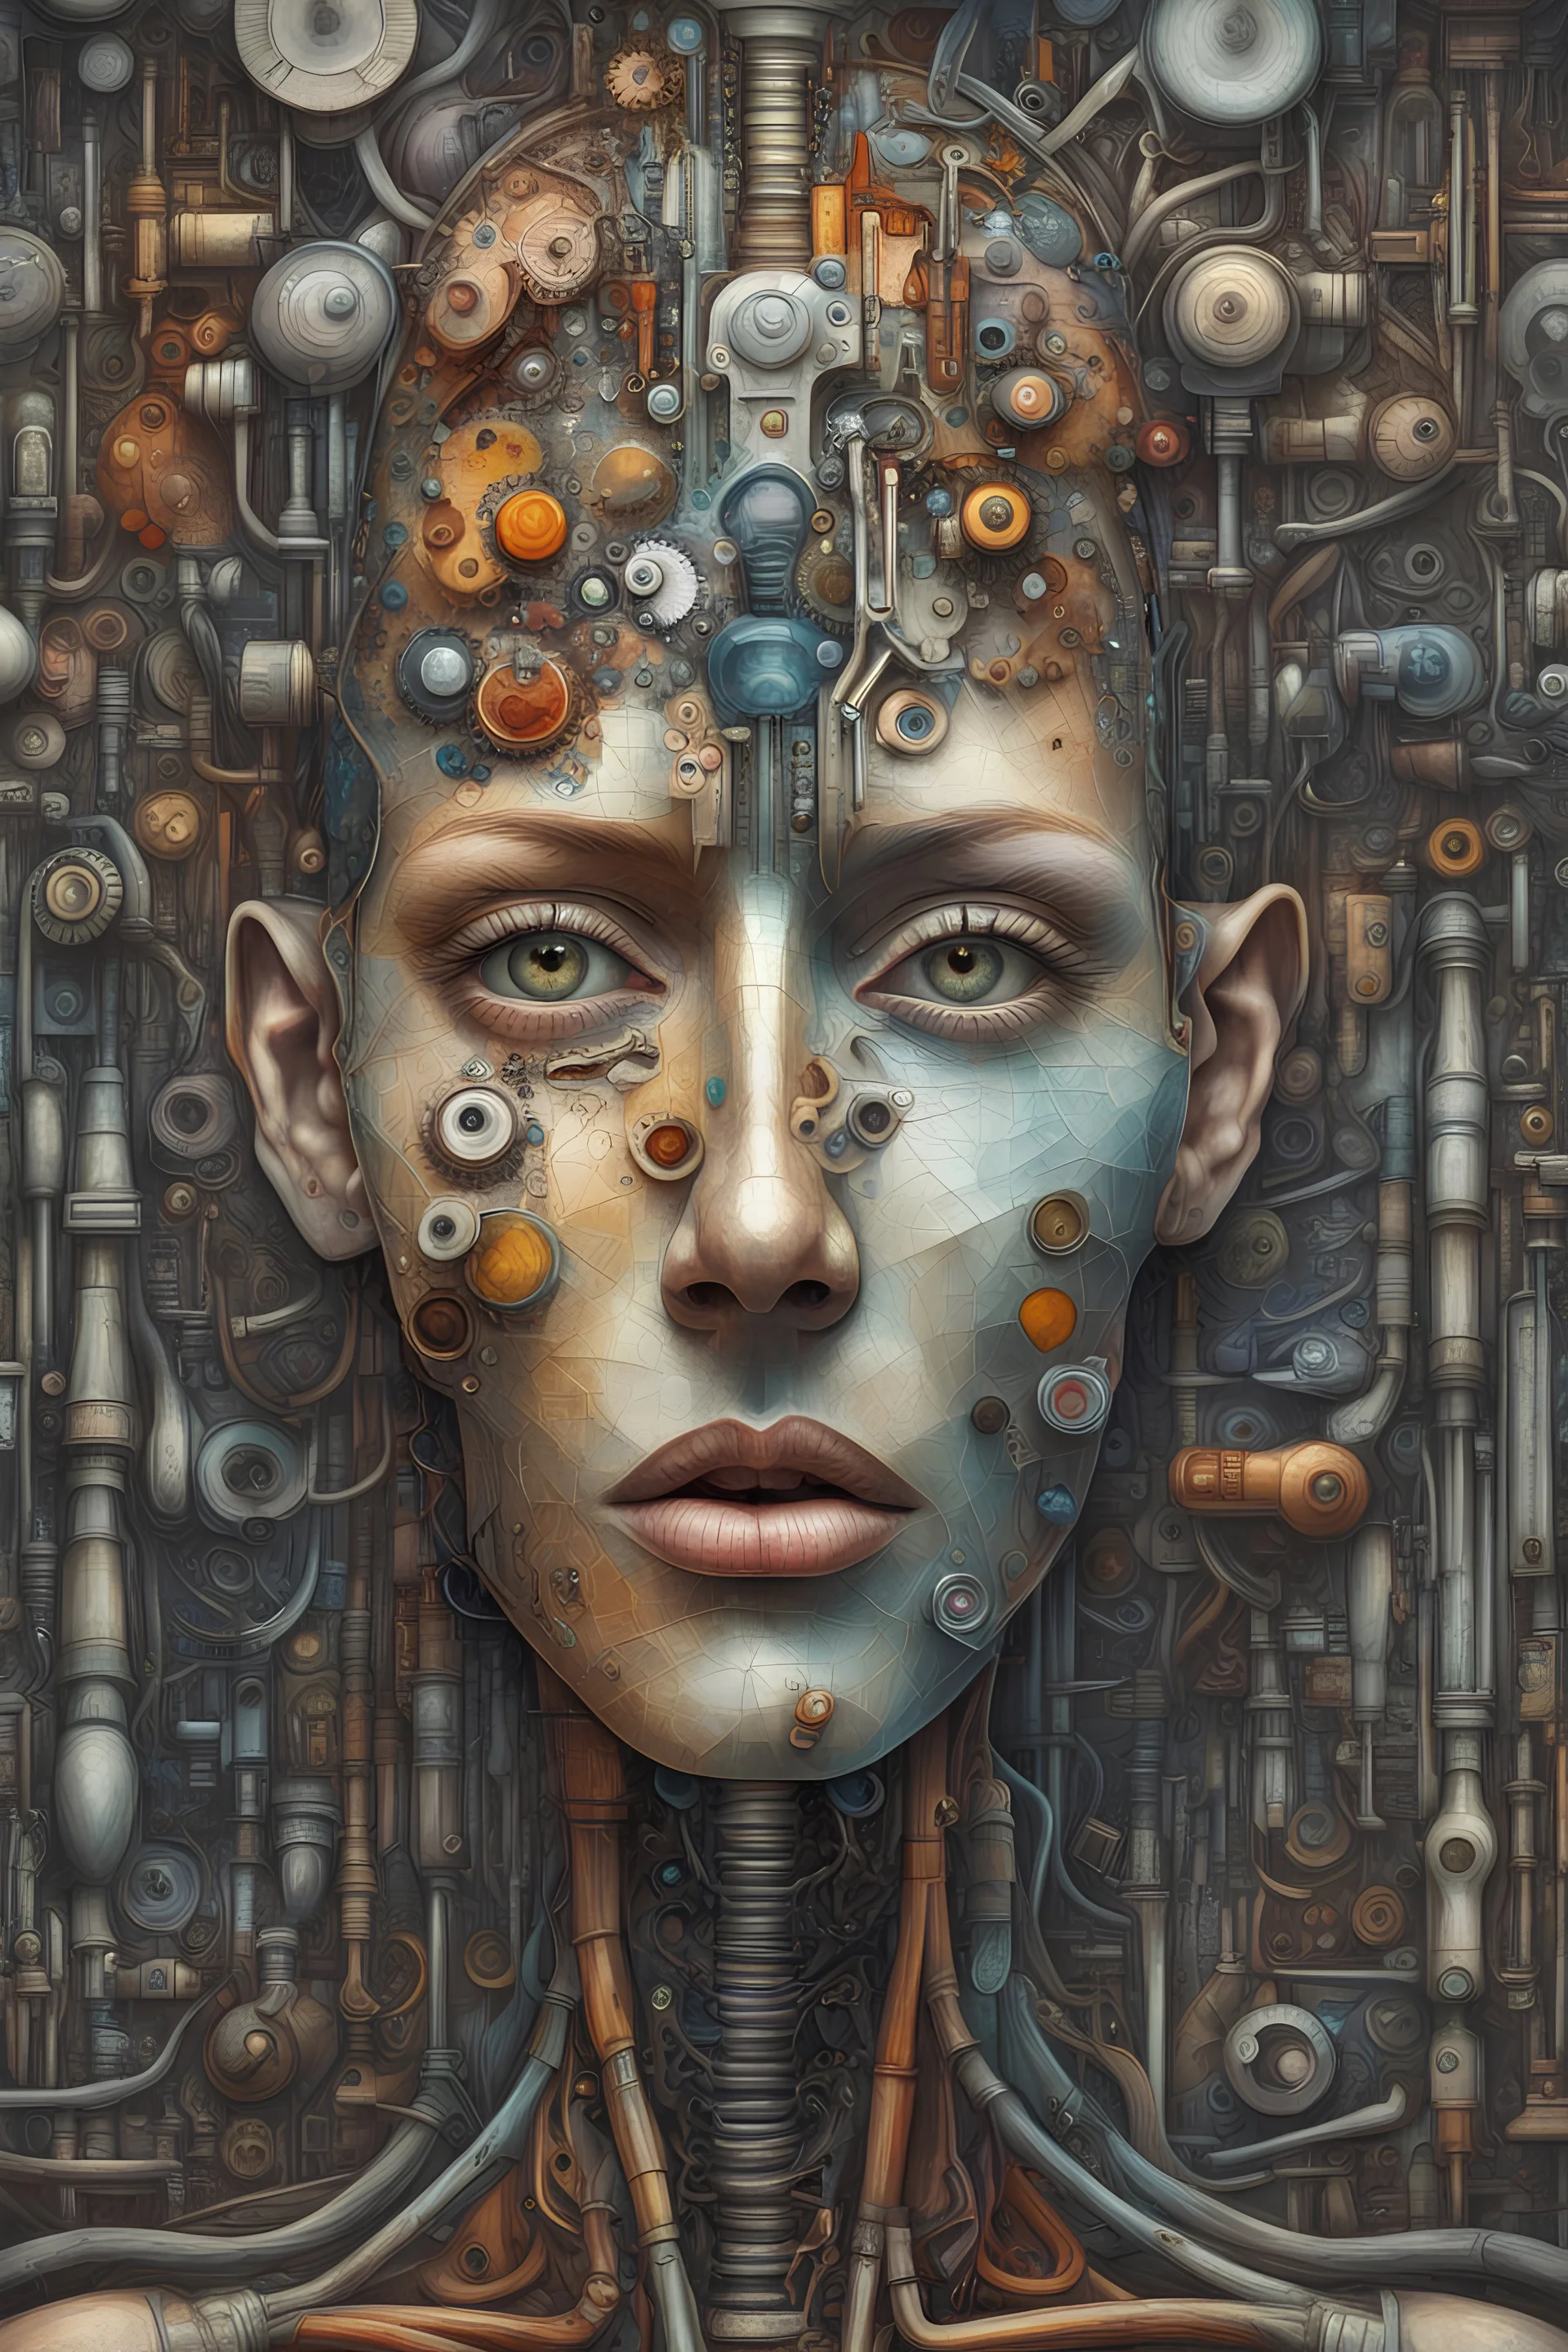 Picasso and Peter Gric style realistic illustration of a front complex bio mechanical woman colored face mixed to supplies colored pieces (detailed eyes, nose, mouth , neck), made of various colored recycled metal objects all around and inside head, anatomical body view, visible brain and skeleton, HDR, UHD, all in focus, clean face, no grain, concept art